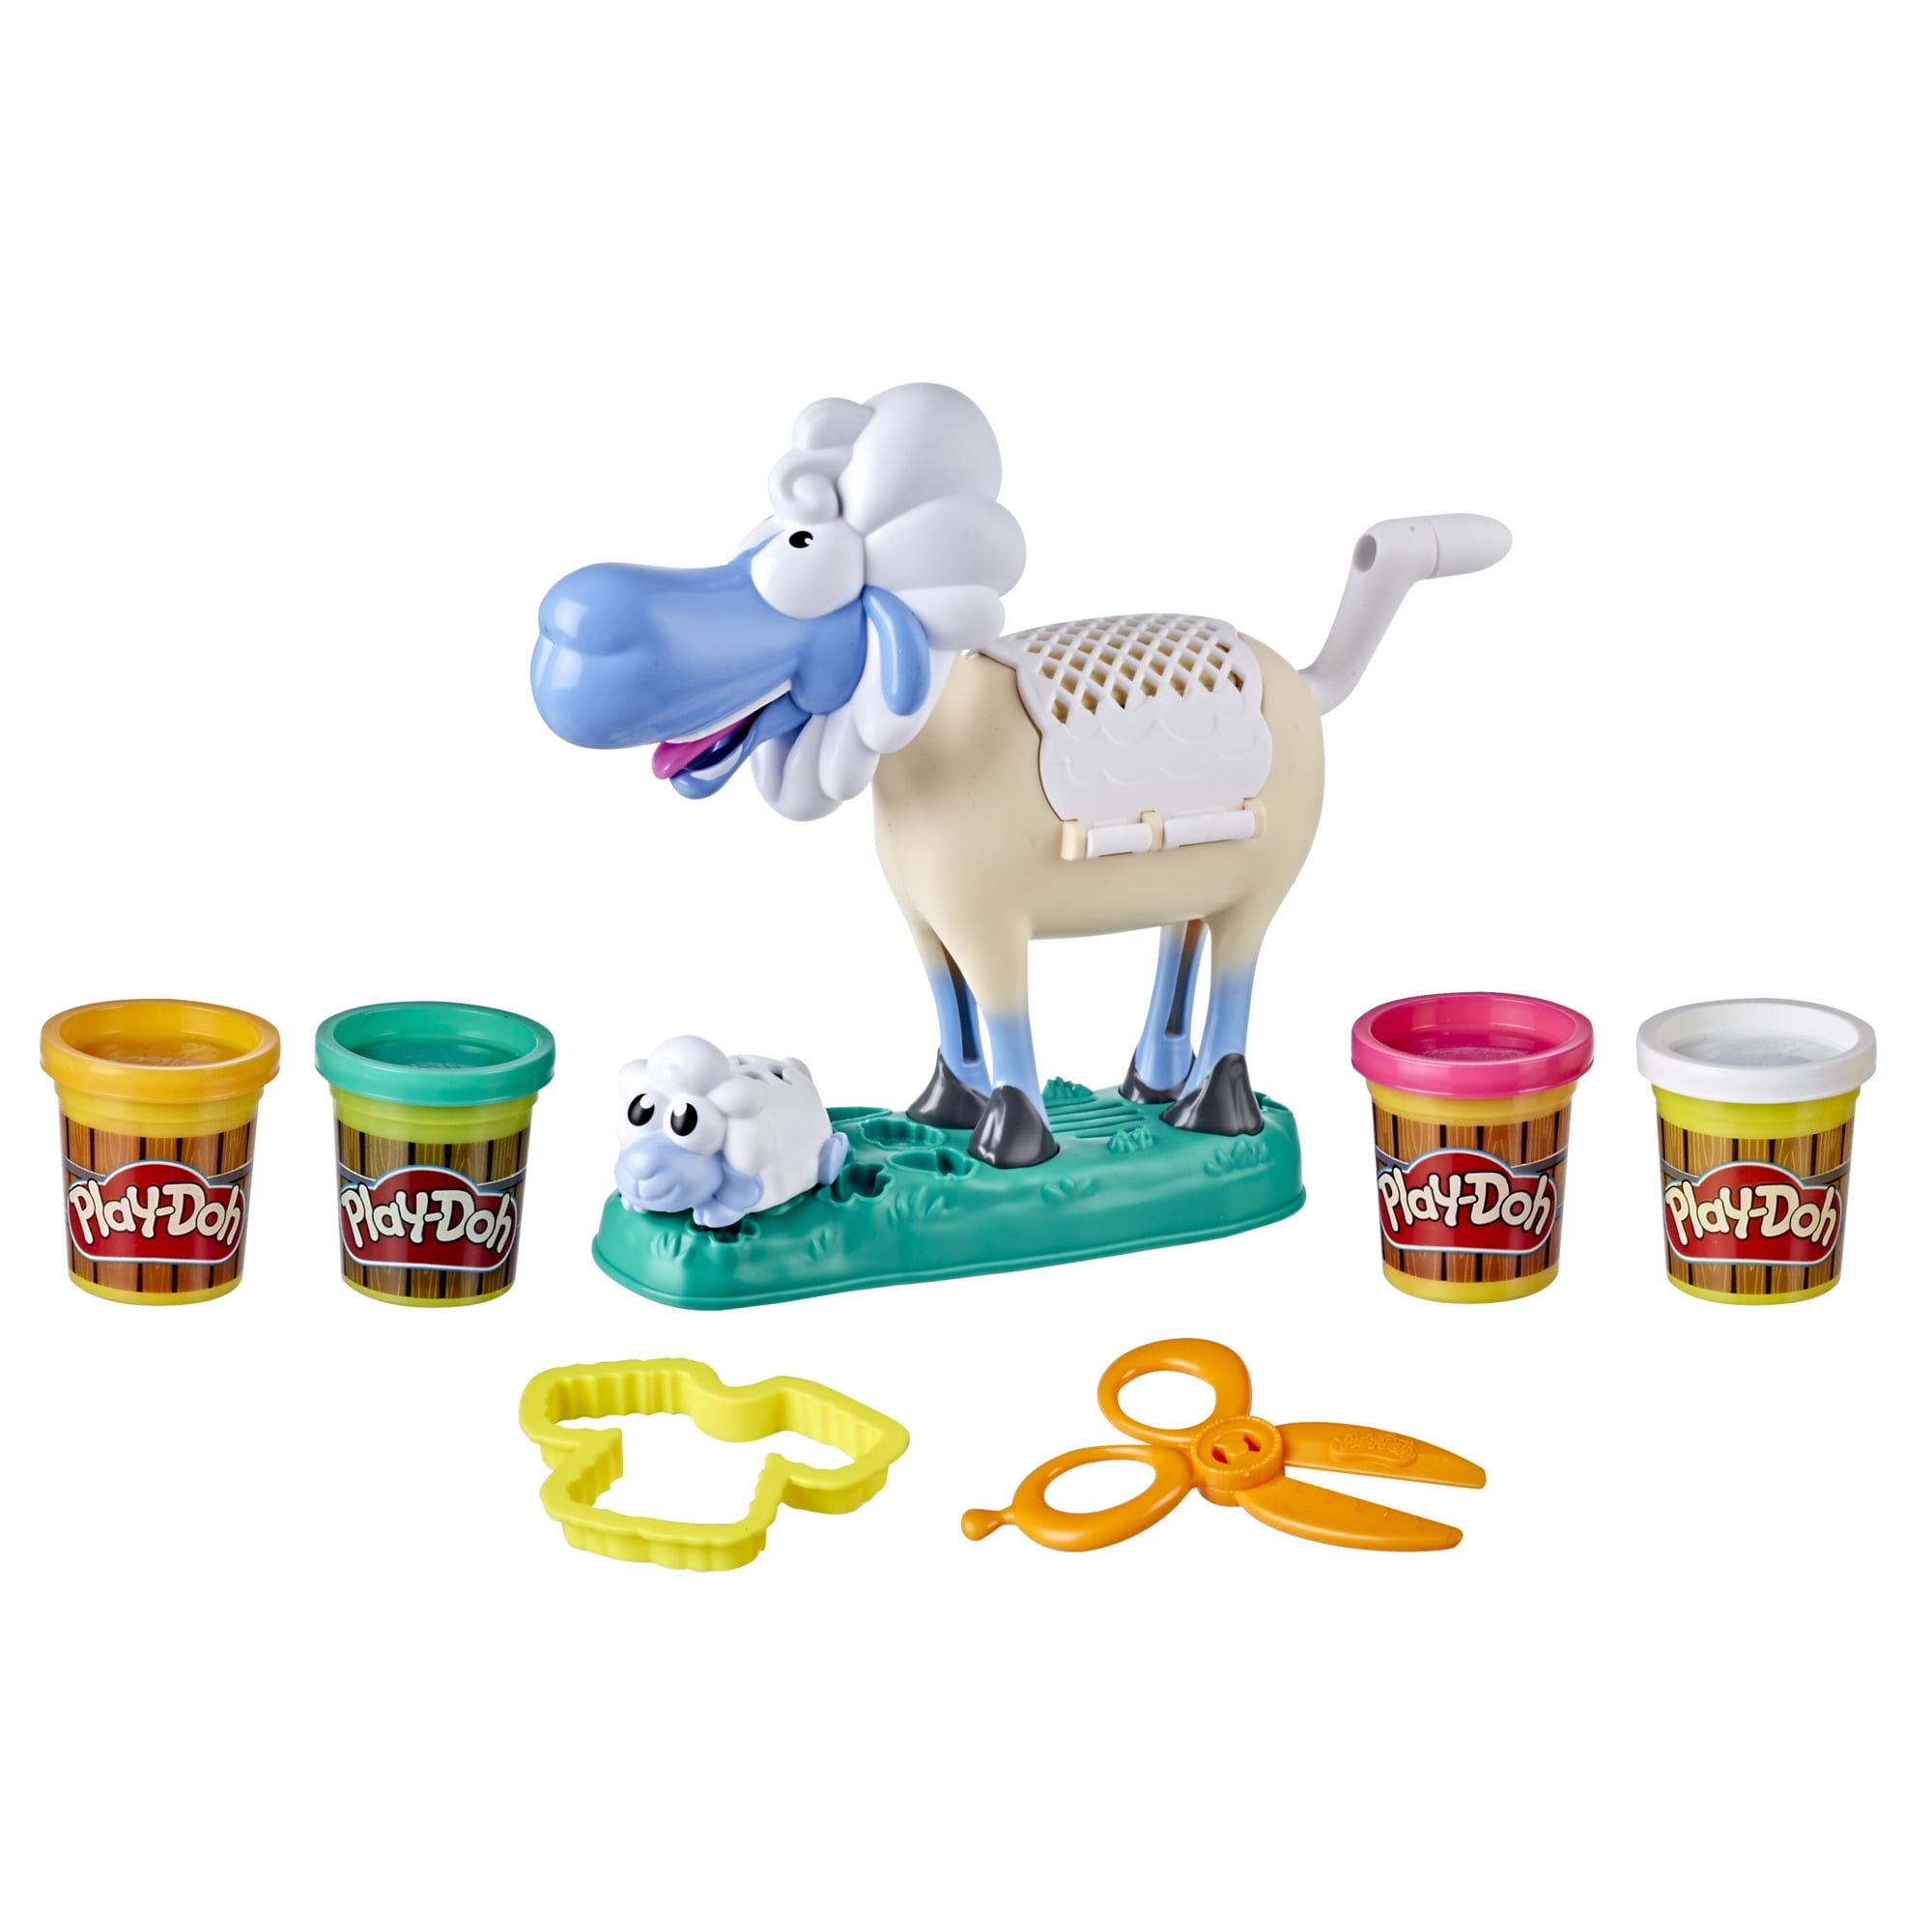 Play-Doh Animal Crew Sherrie Shearin' Sheep, Includes 4 Cans with 8 Ounces  Total 